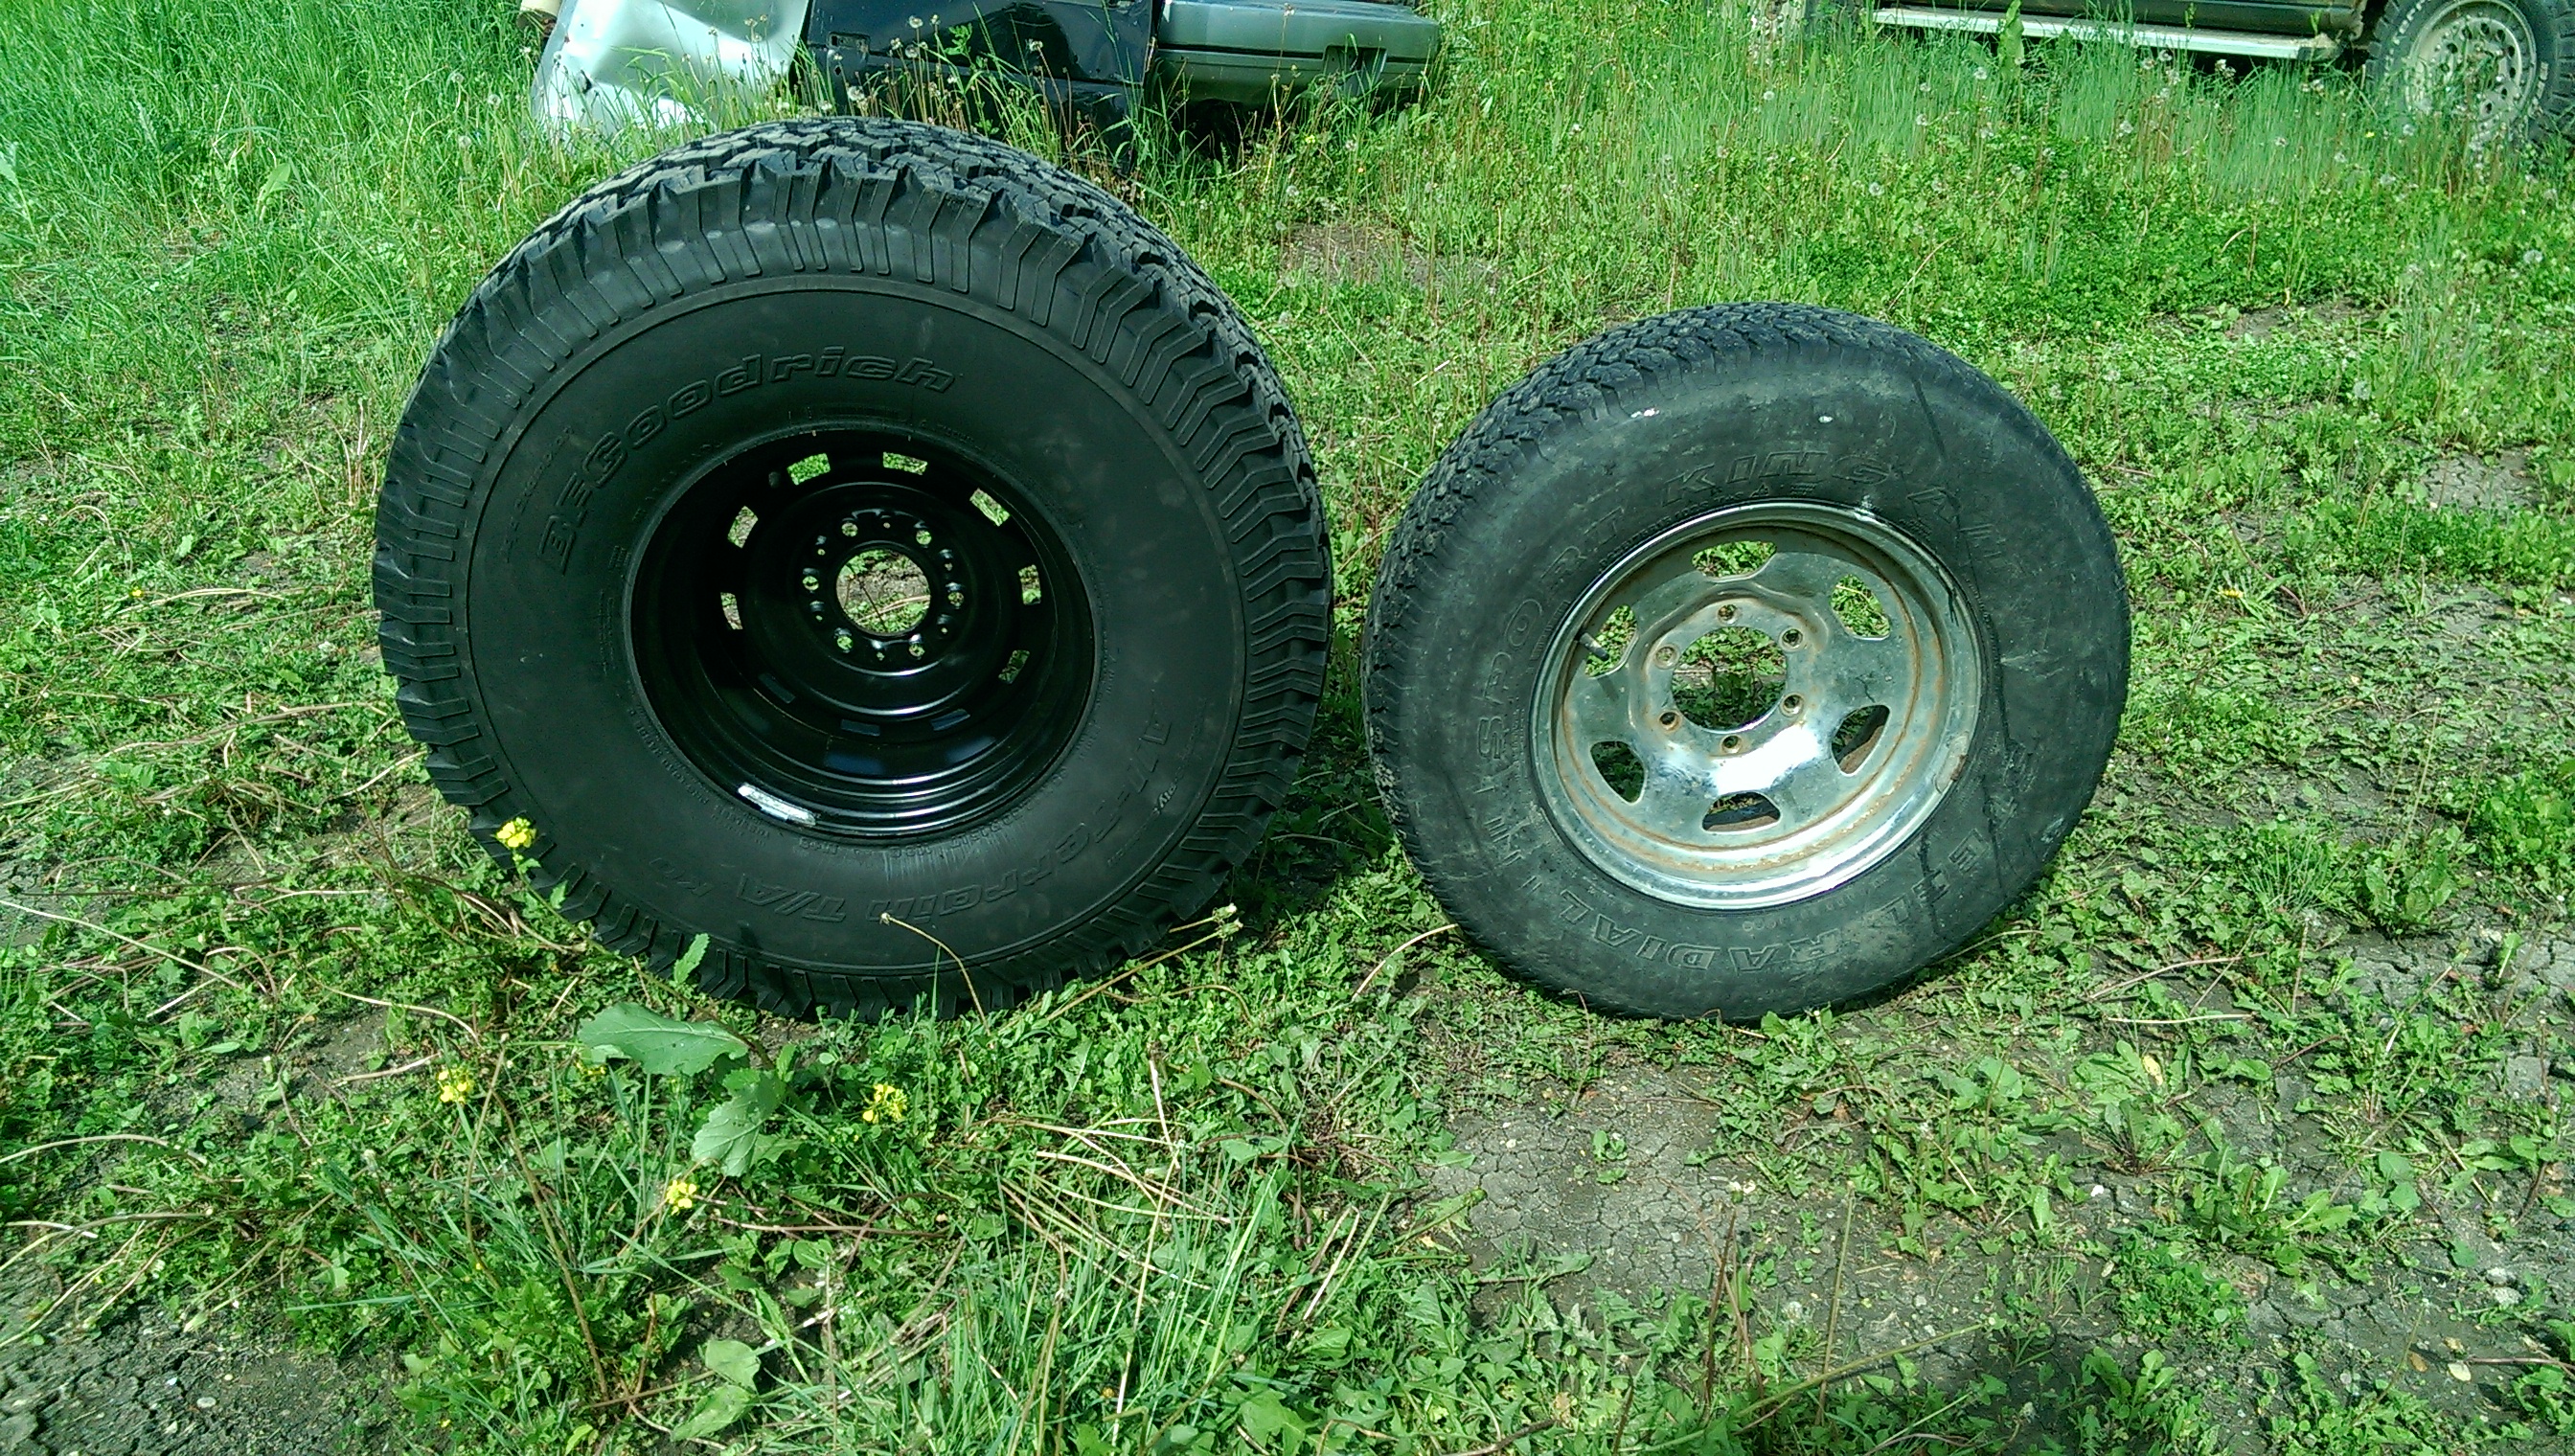 225/75r15 on right and 35x12.5r15 on left